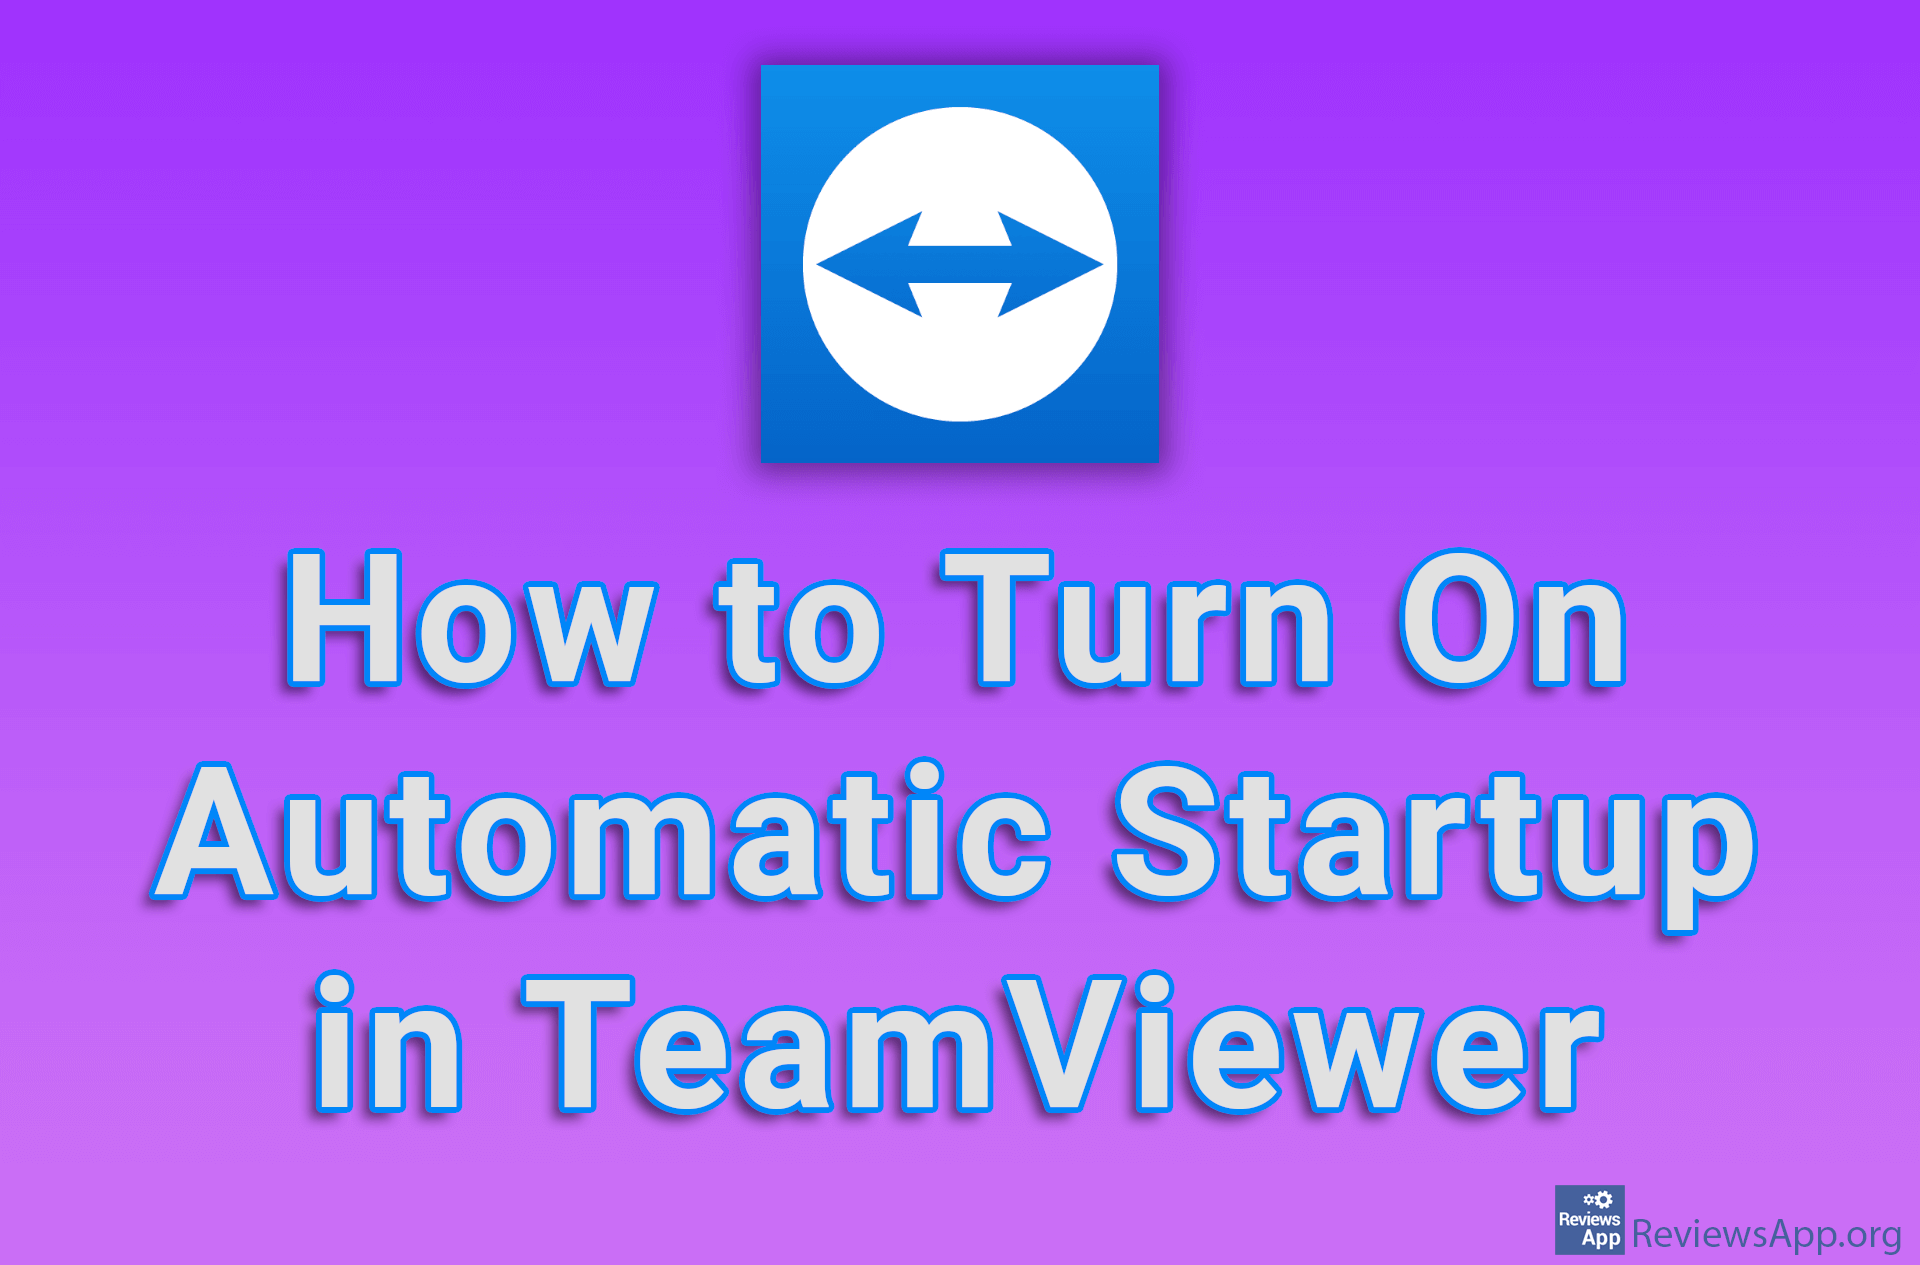 How to Turn On Automatic Startup in TeamViewer